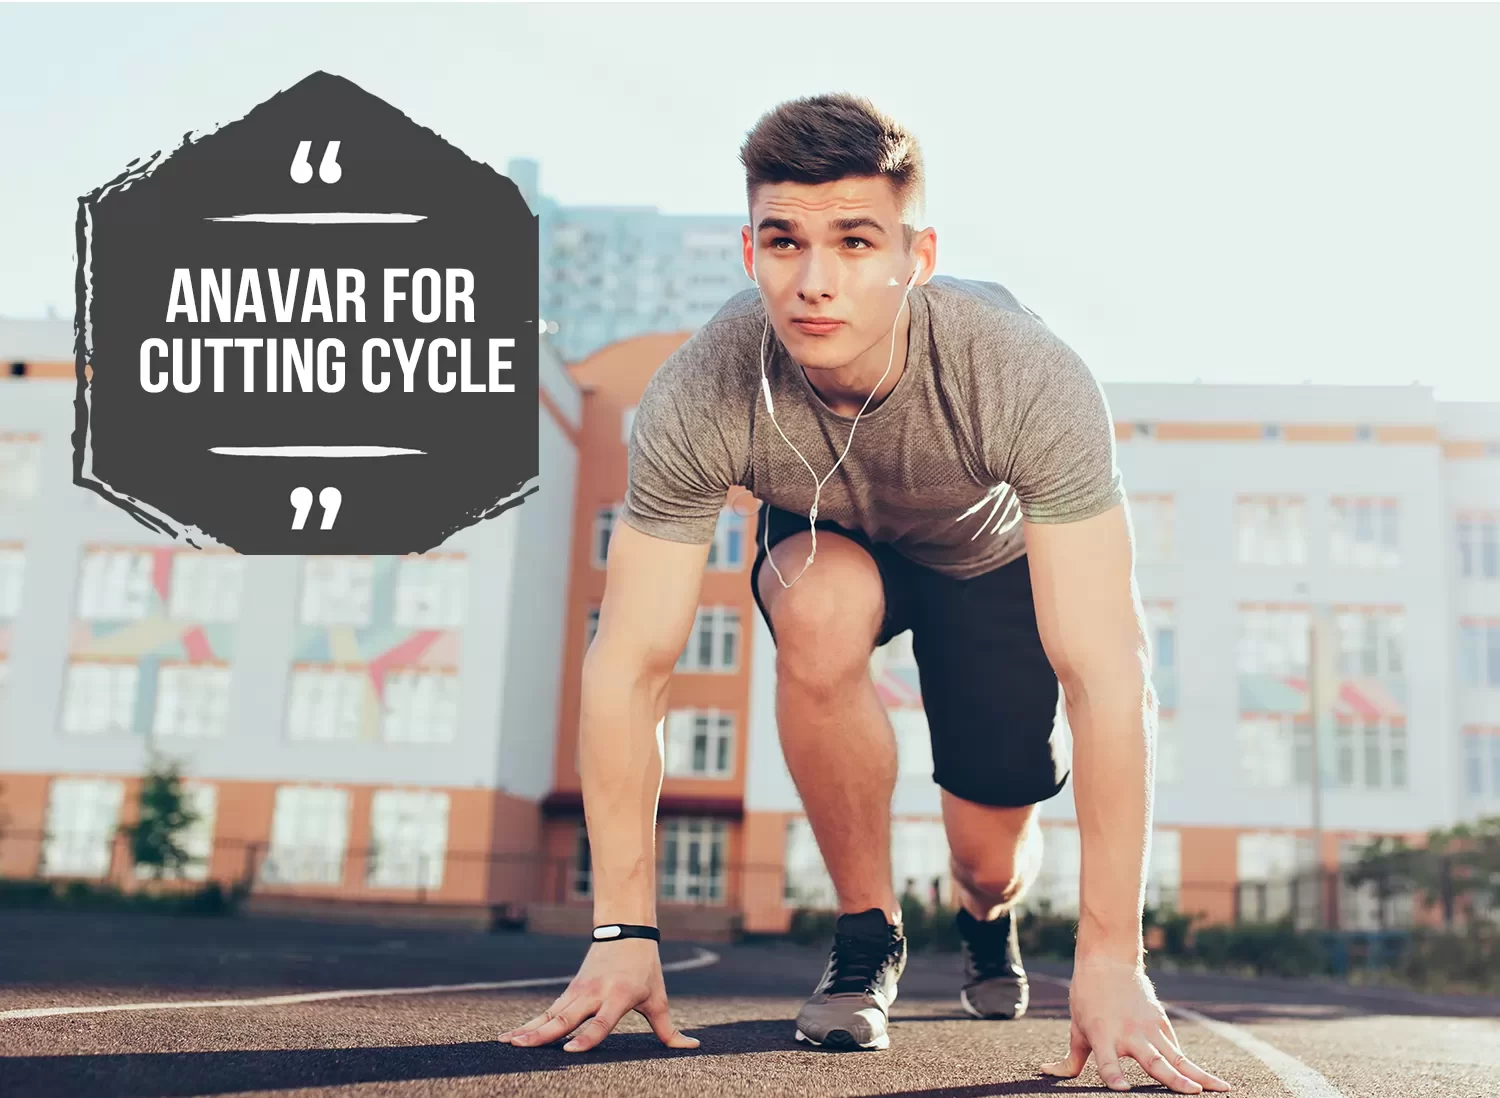 Anavar for cutting cycle